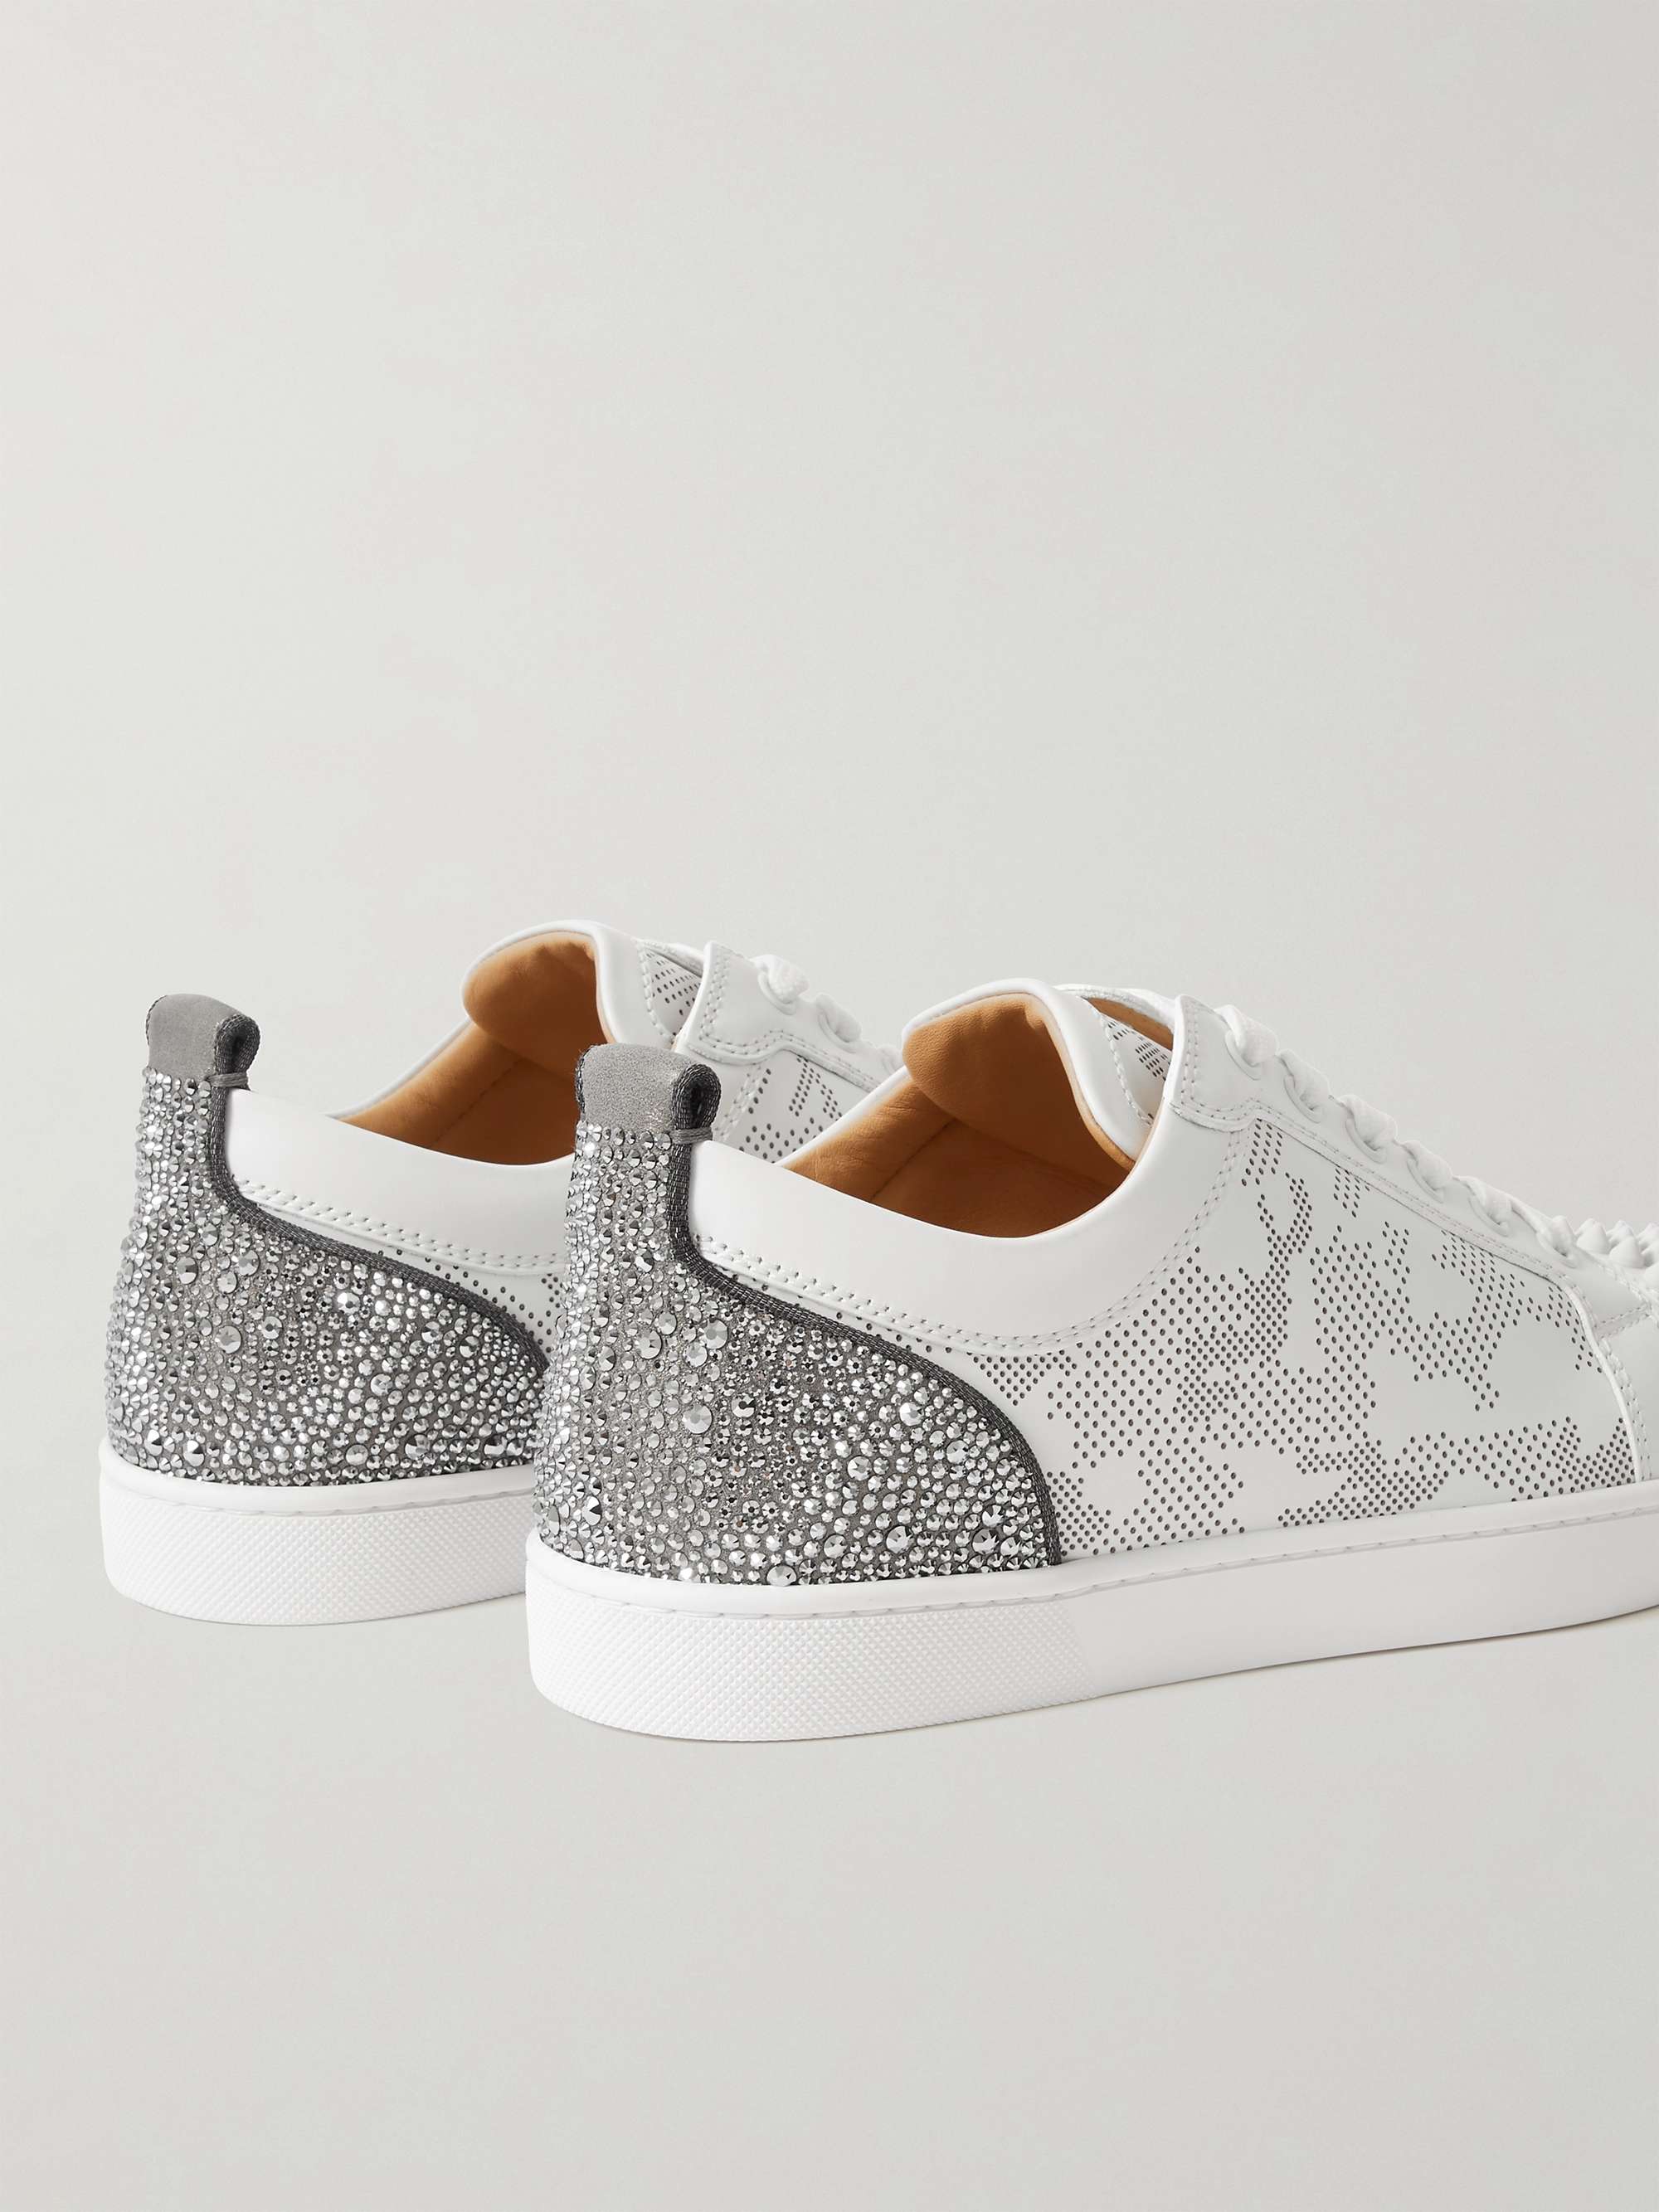 CHRISTIAN LOUBOUTIN Louis Junior Spikes Embellished Perforated Leather Sneakers